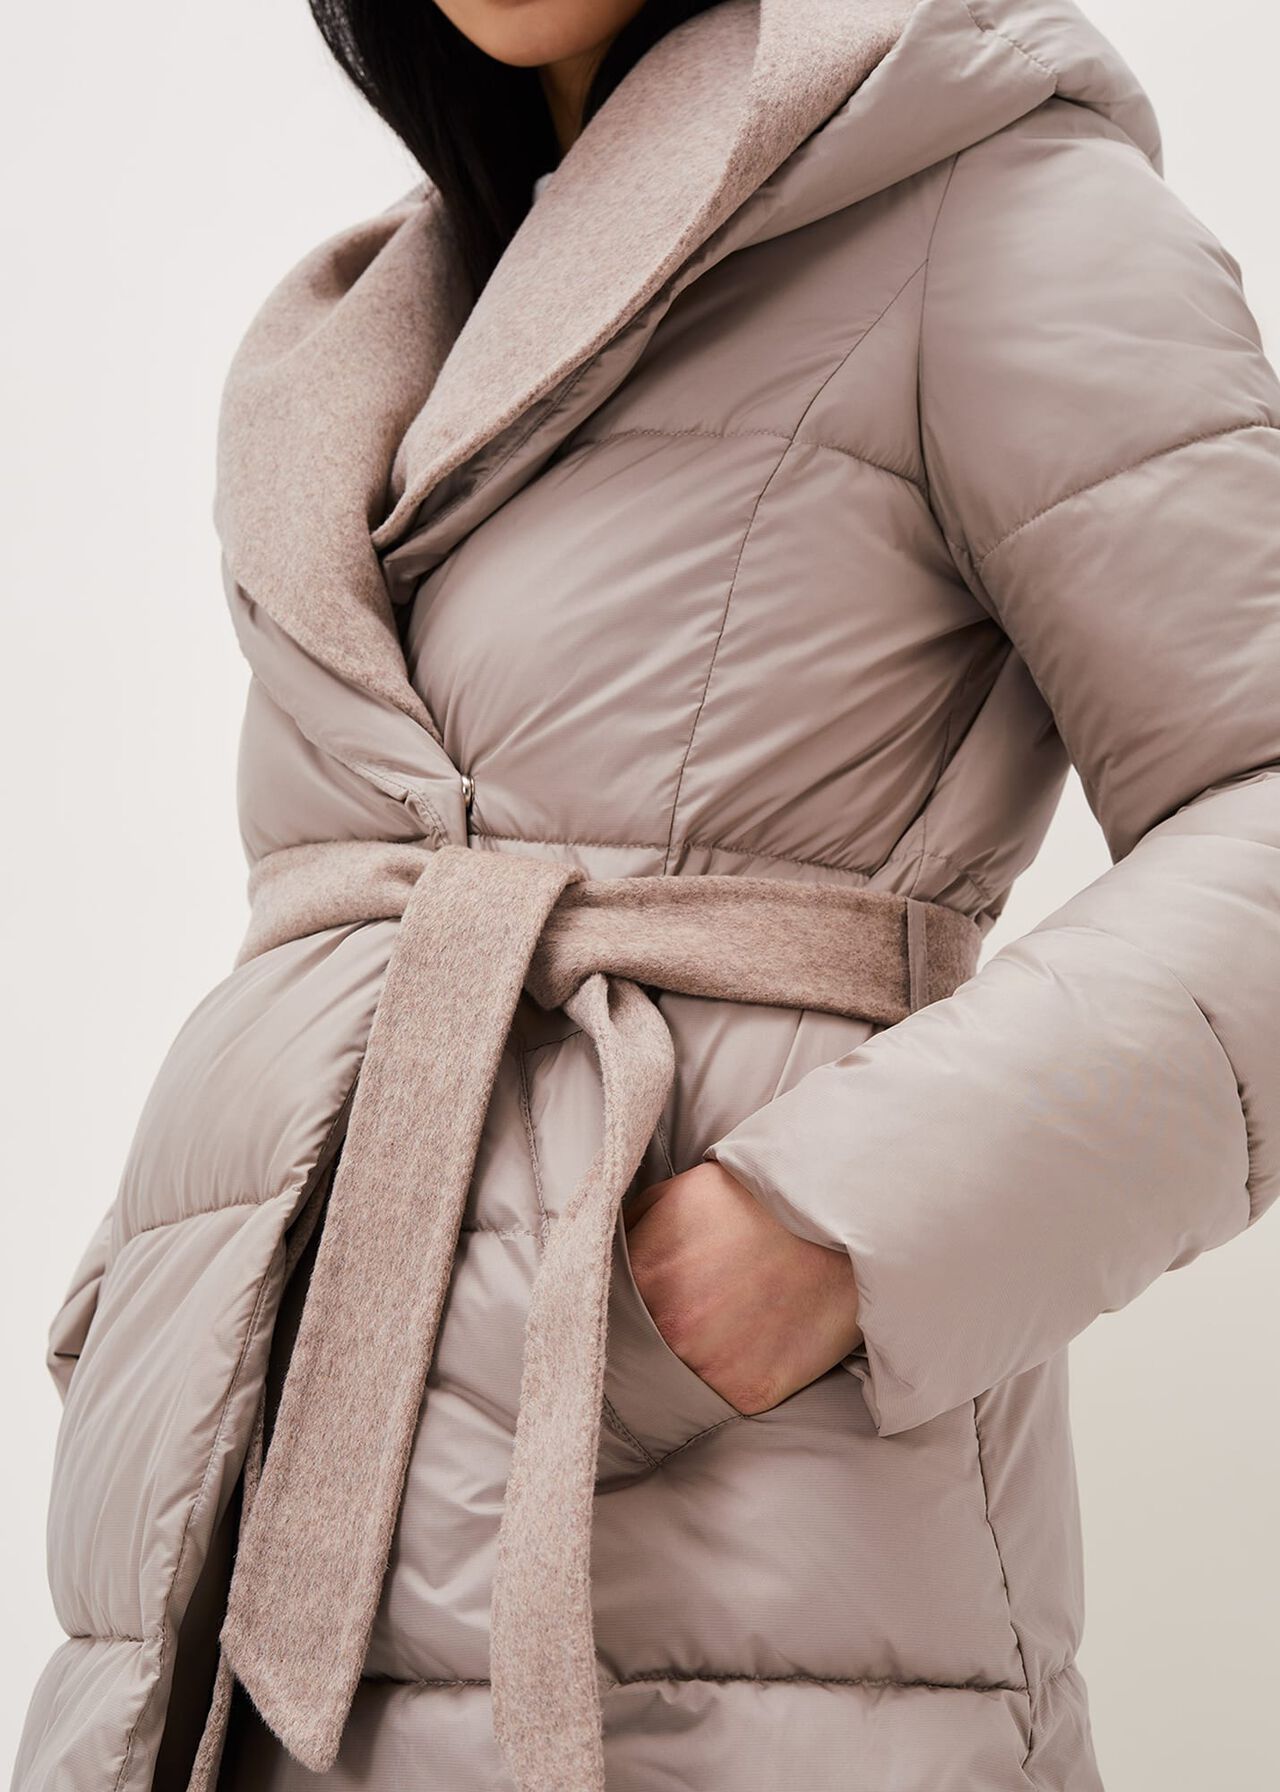 Brae Belted Puffer Knit Coat